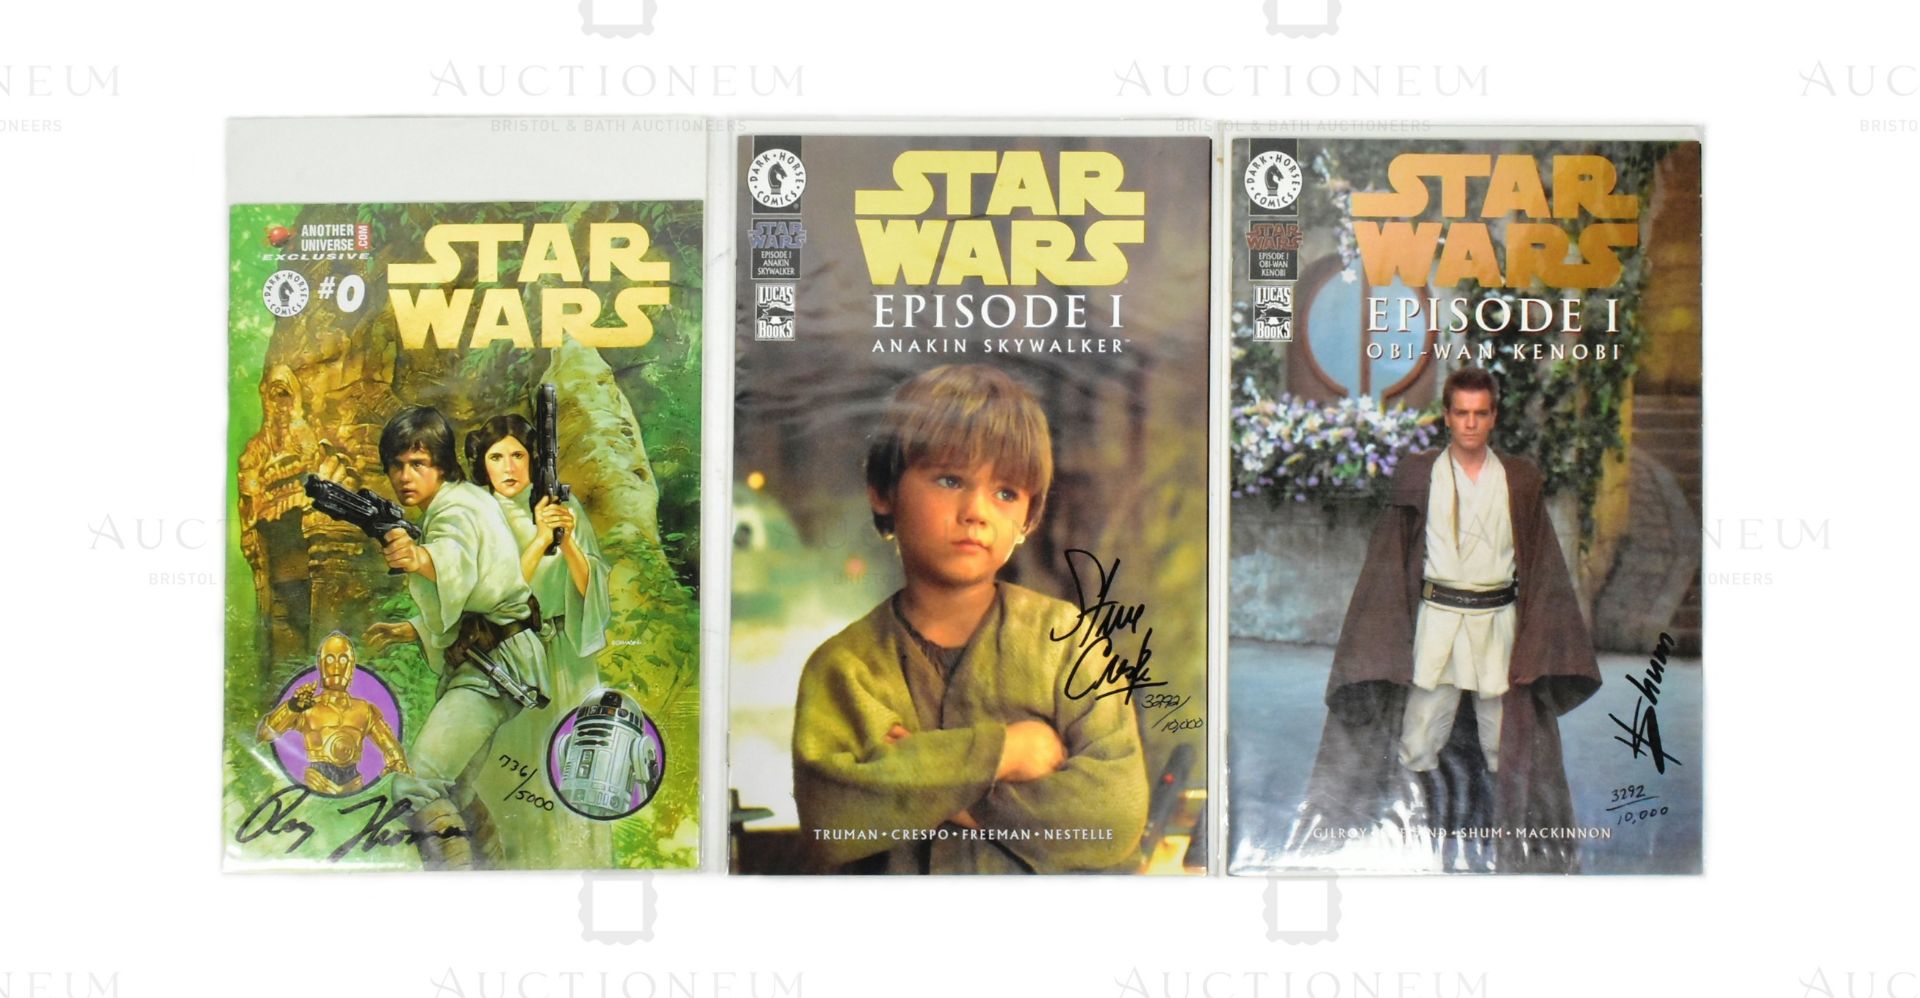 STAR WARS - DARK HORSE COMIC BOOKS - SIGNED EXCLUSIVE ISSUES